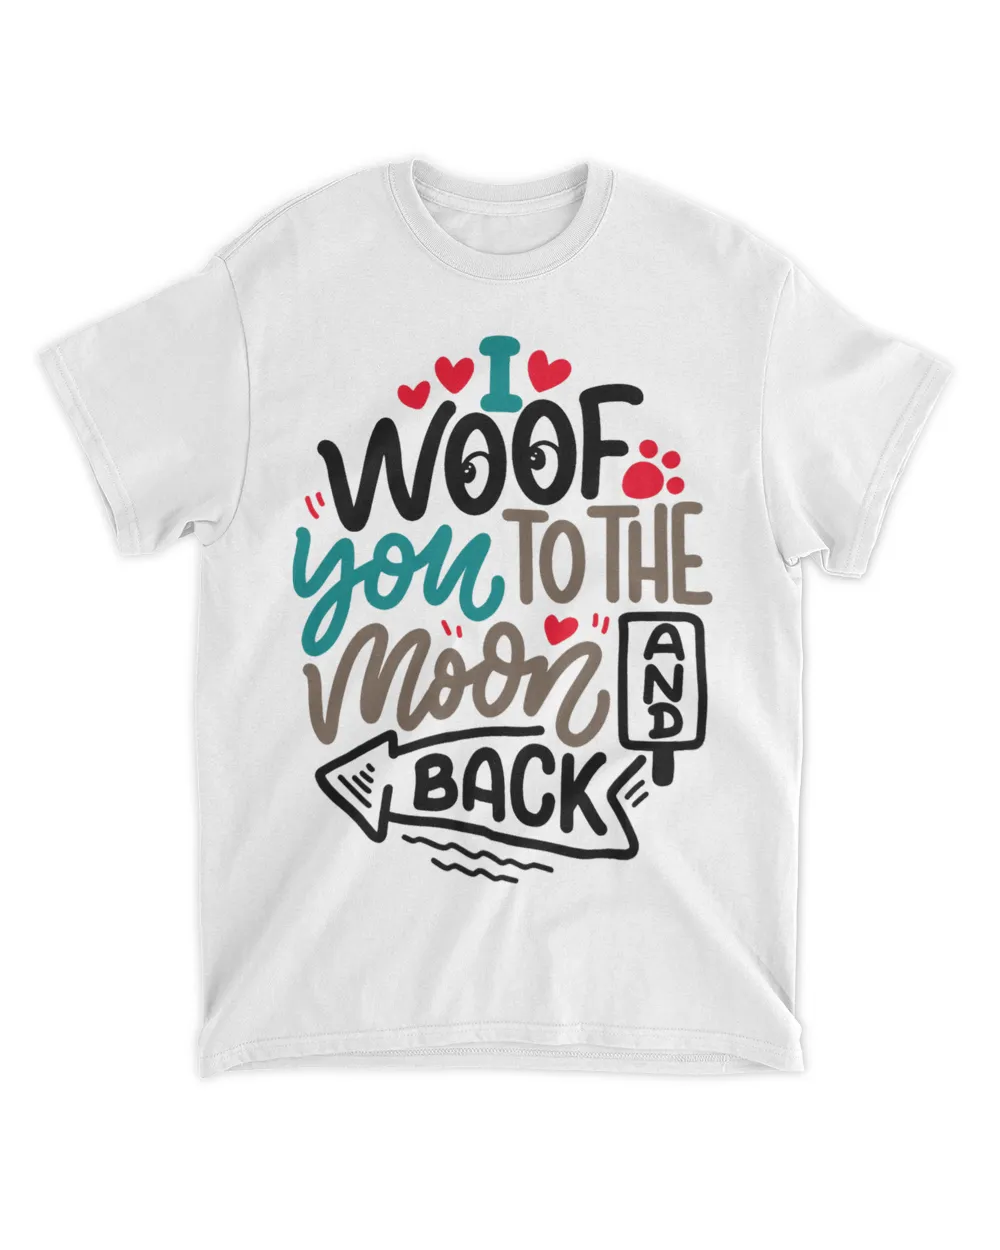 I woof you to the moon and back